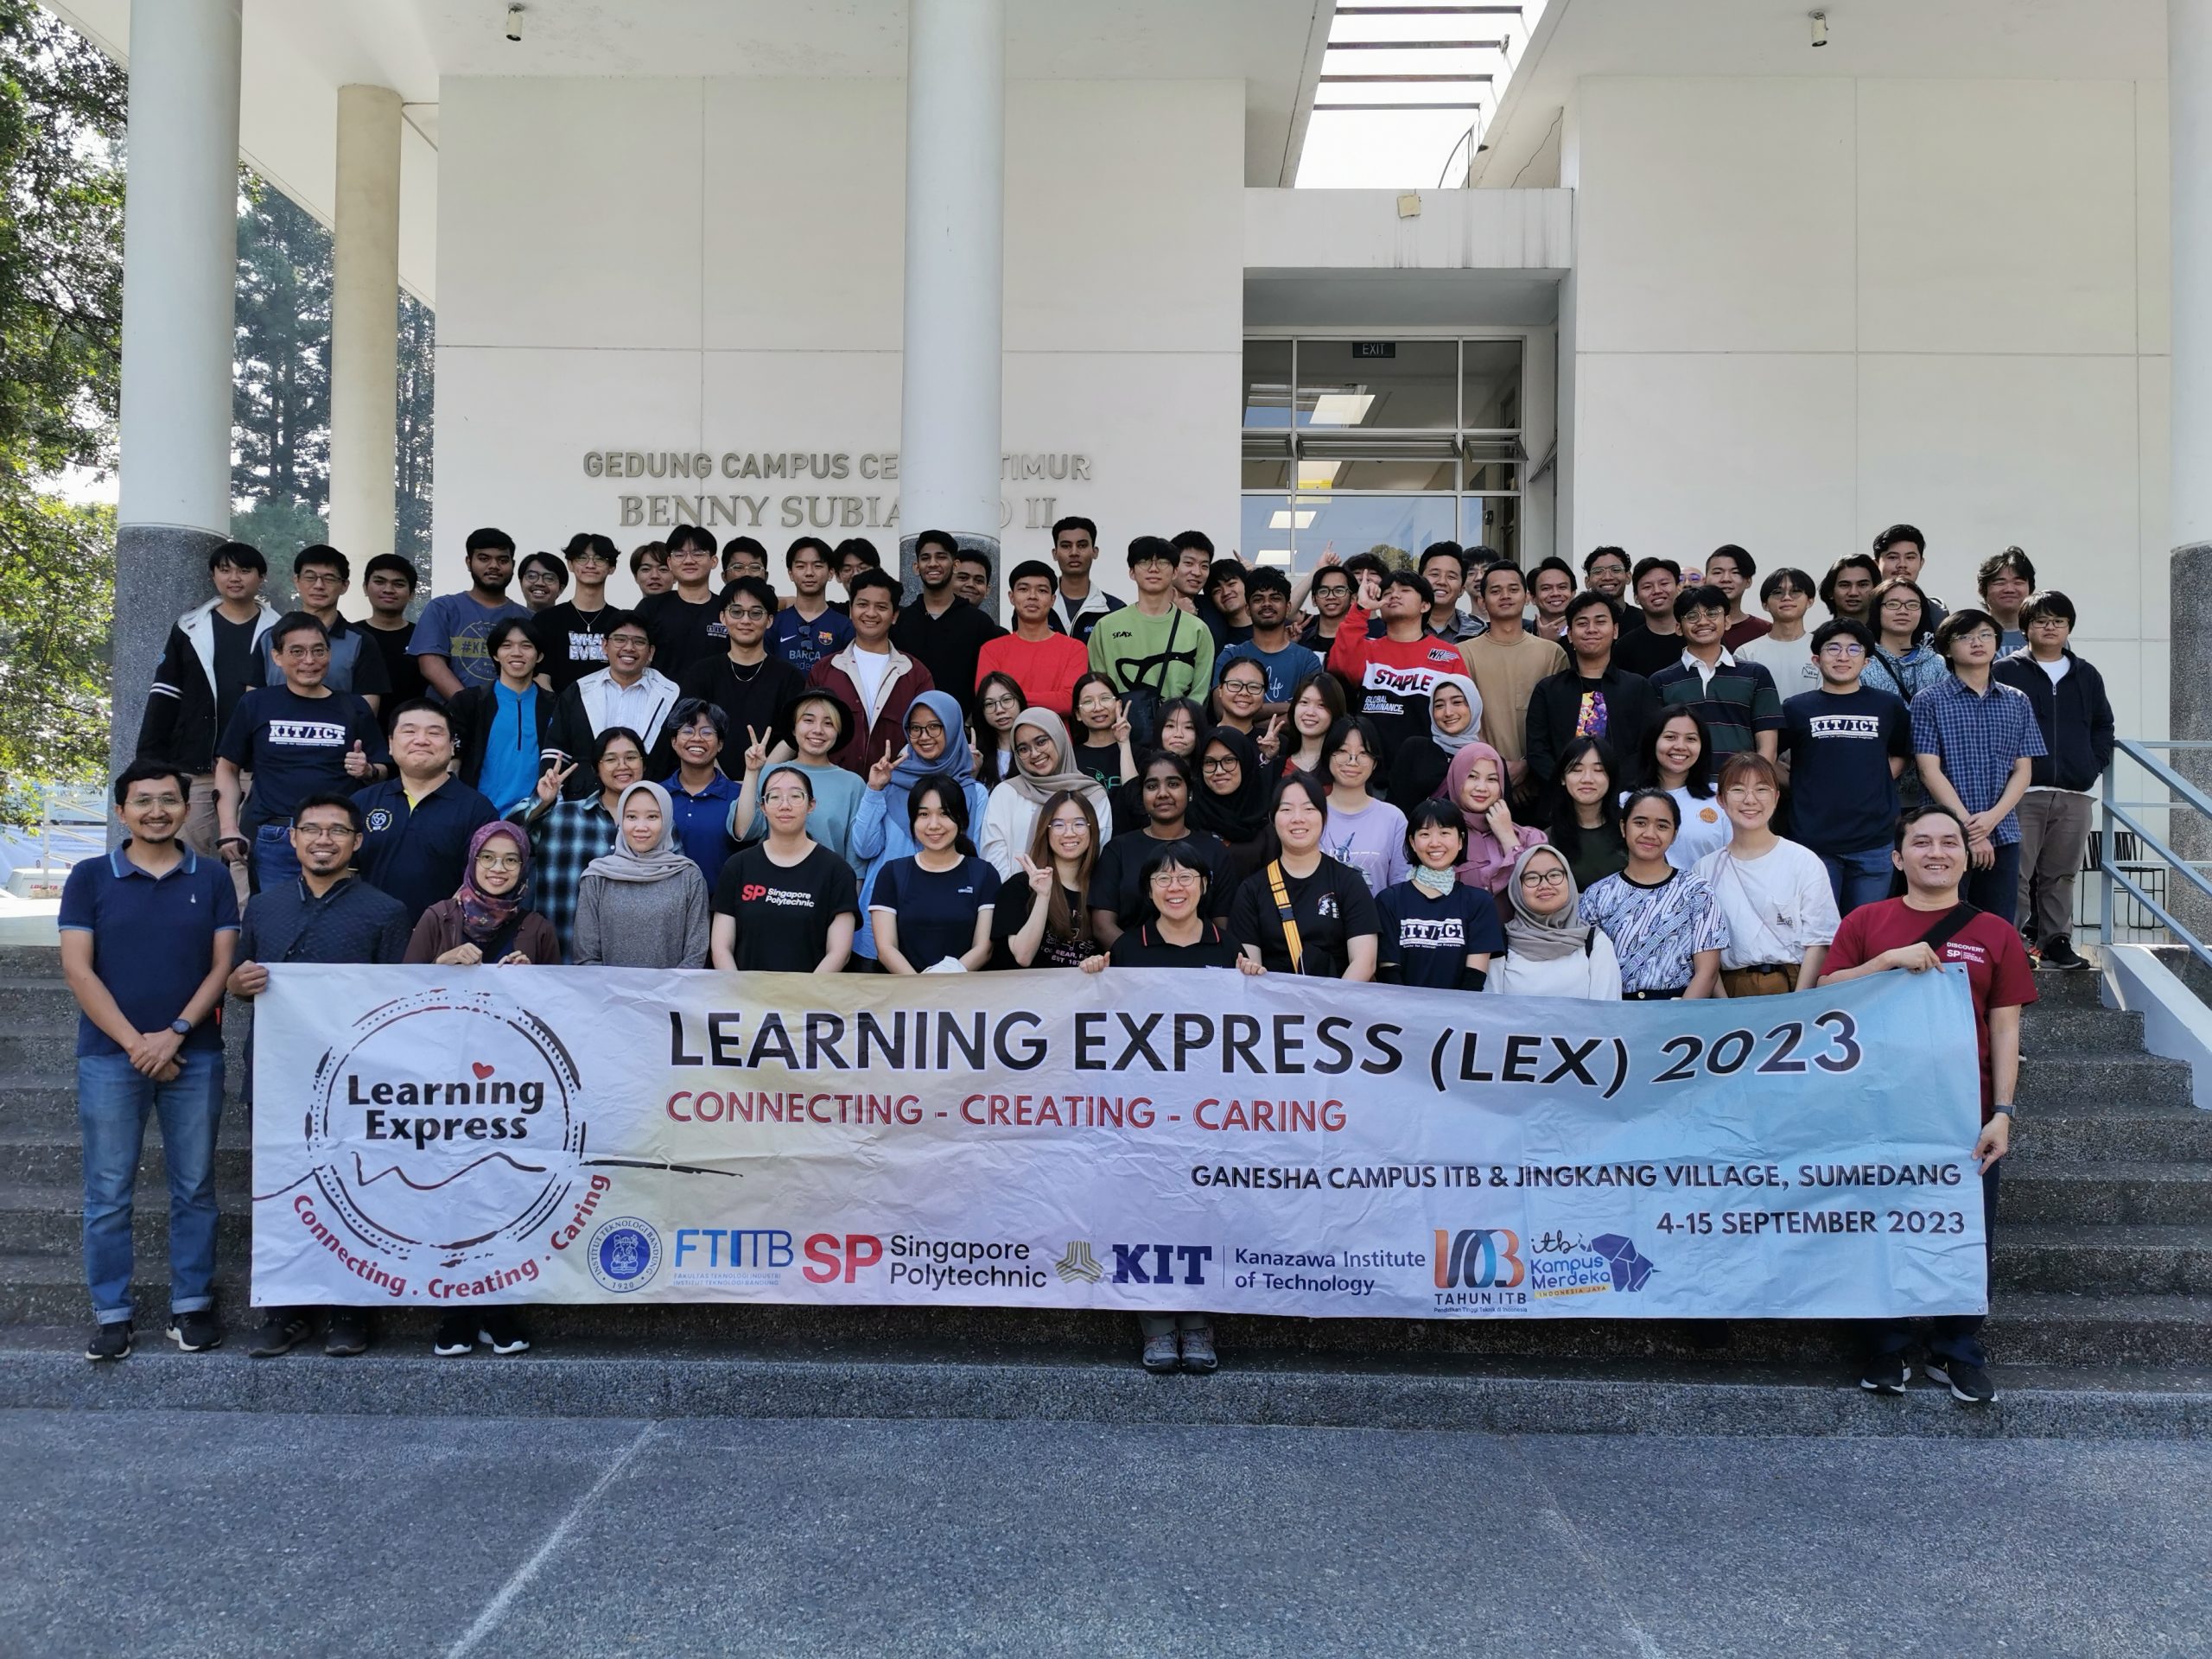 Learning Express (LEX) 2023